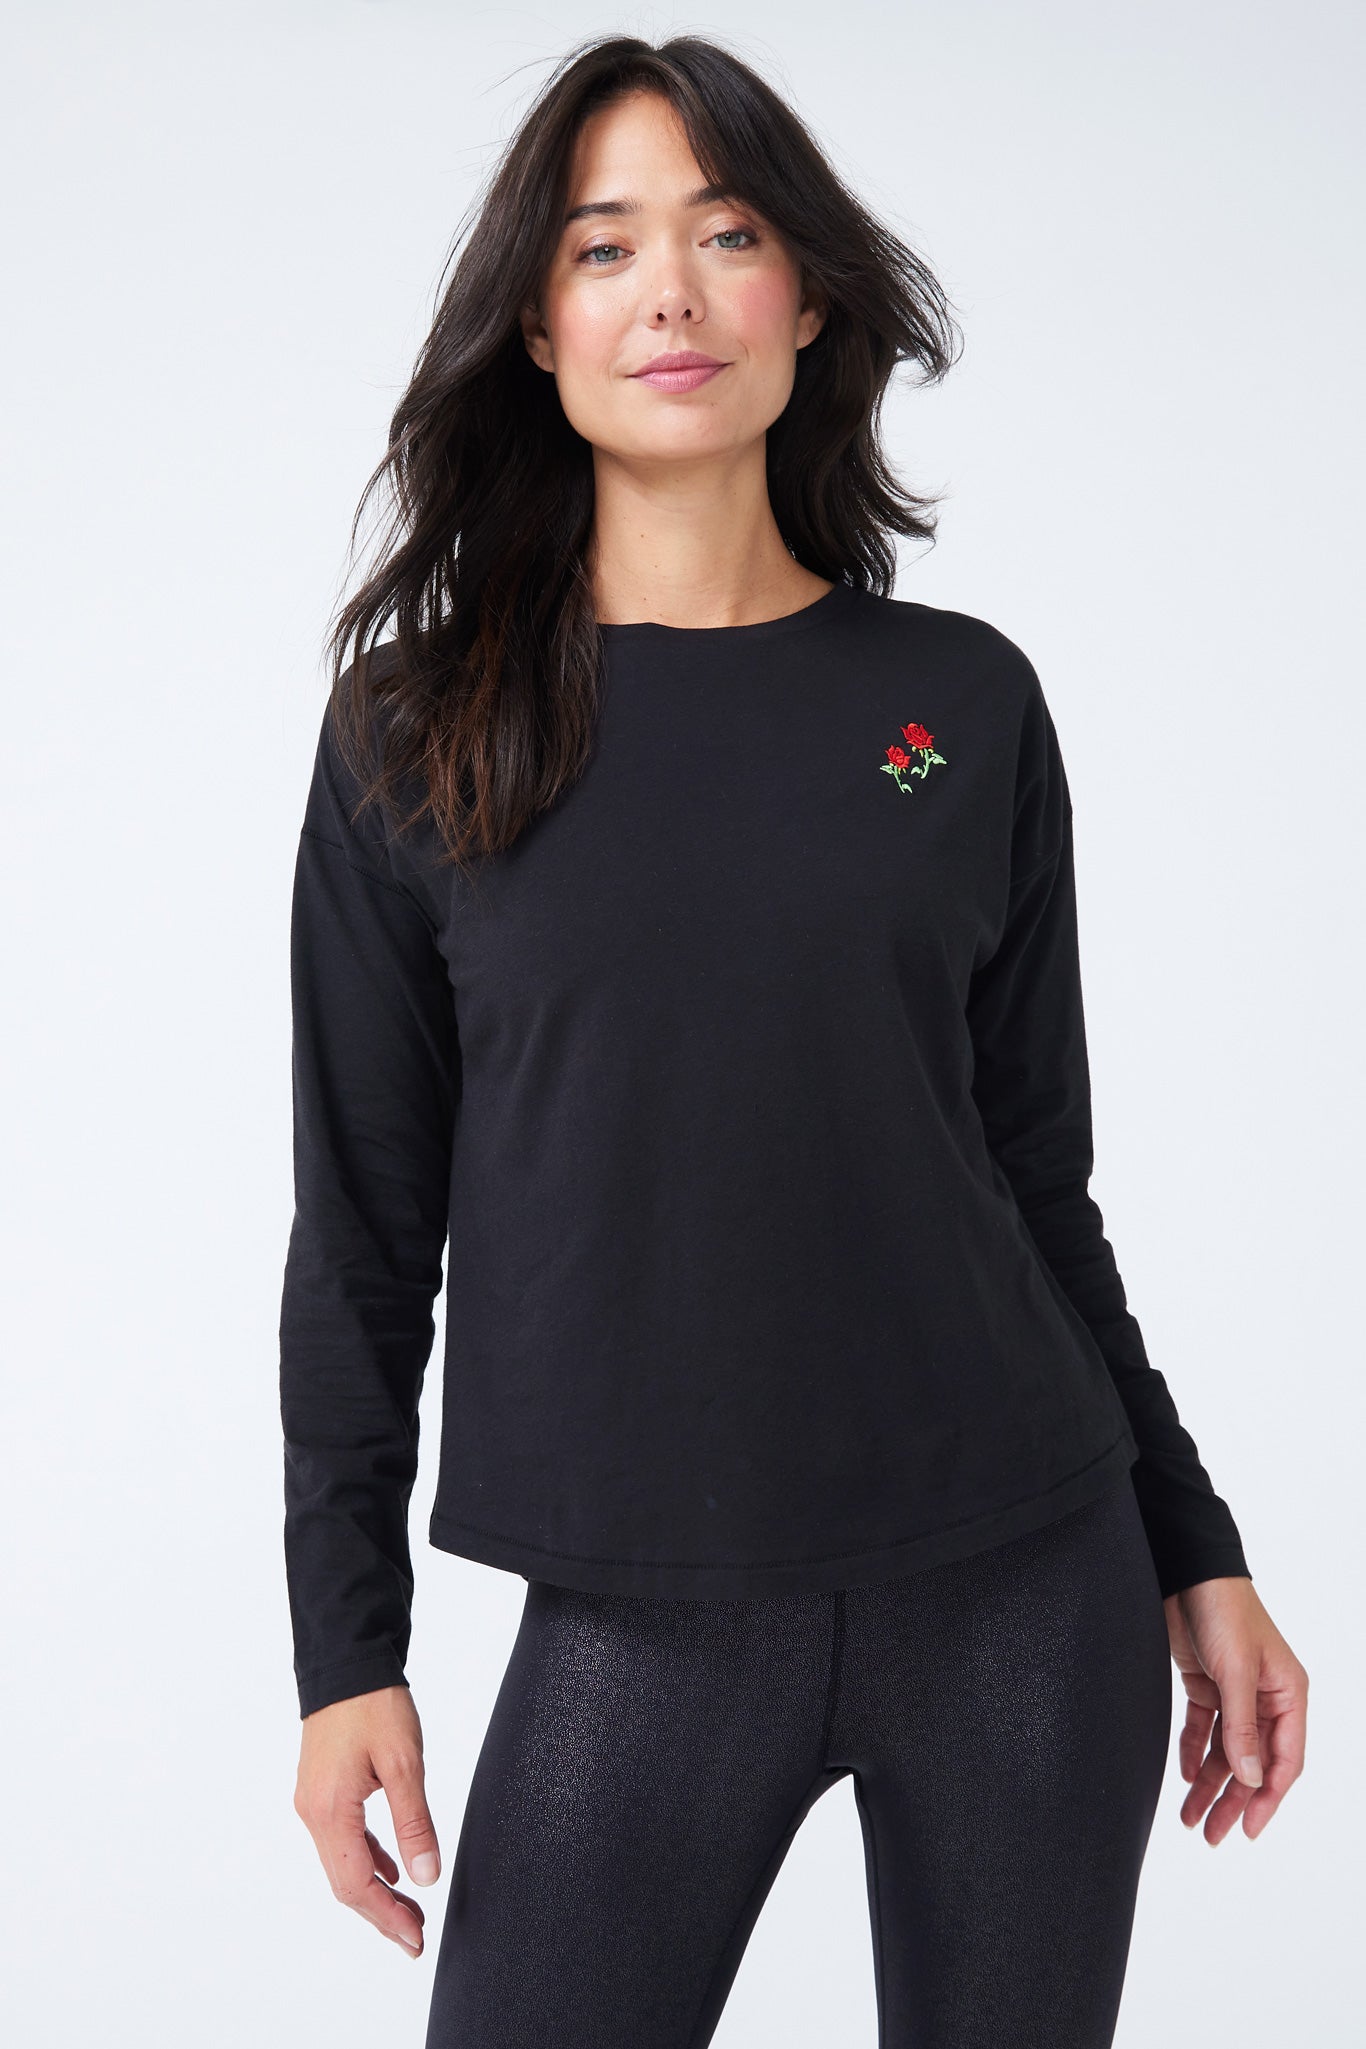 Bliss Long Sleeve Tee in Embroidered Rose Black